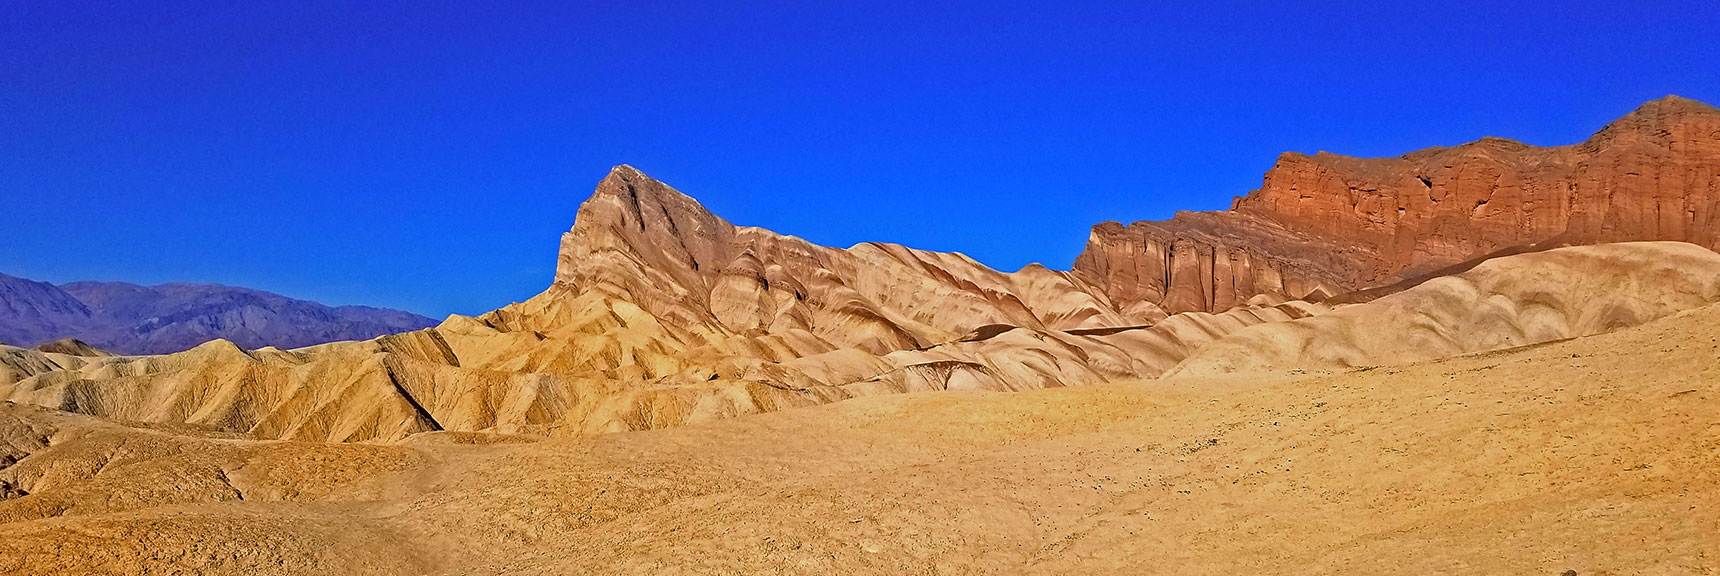 Closing in on Zabriskie Point, More Familiar Perspective of Manly Beacon. | Golden Canyon to Zabriskie Point | Death Valley National Park, California